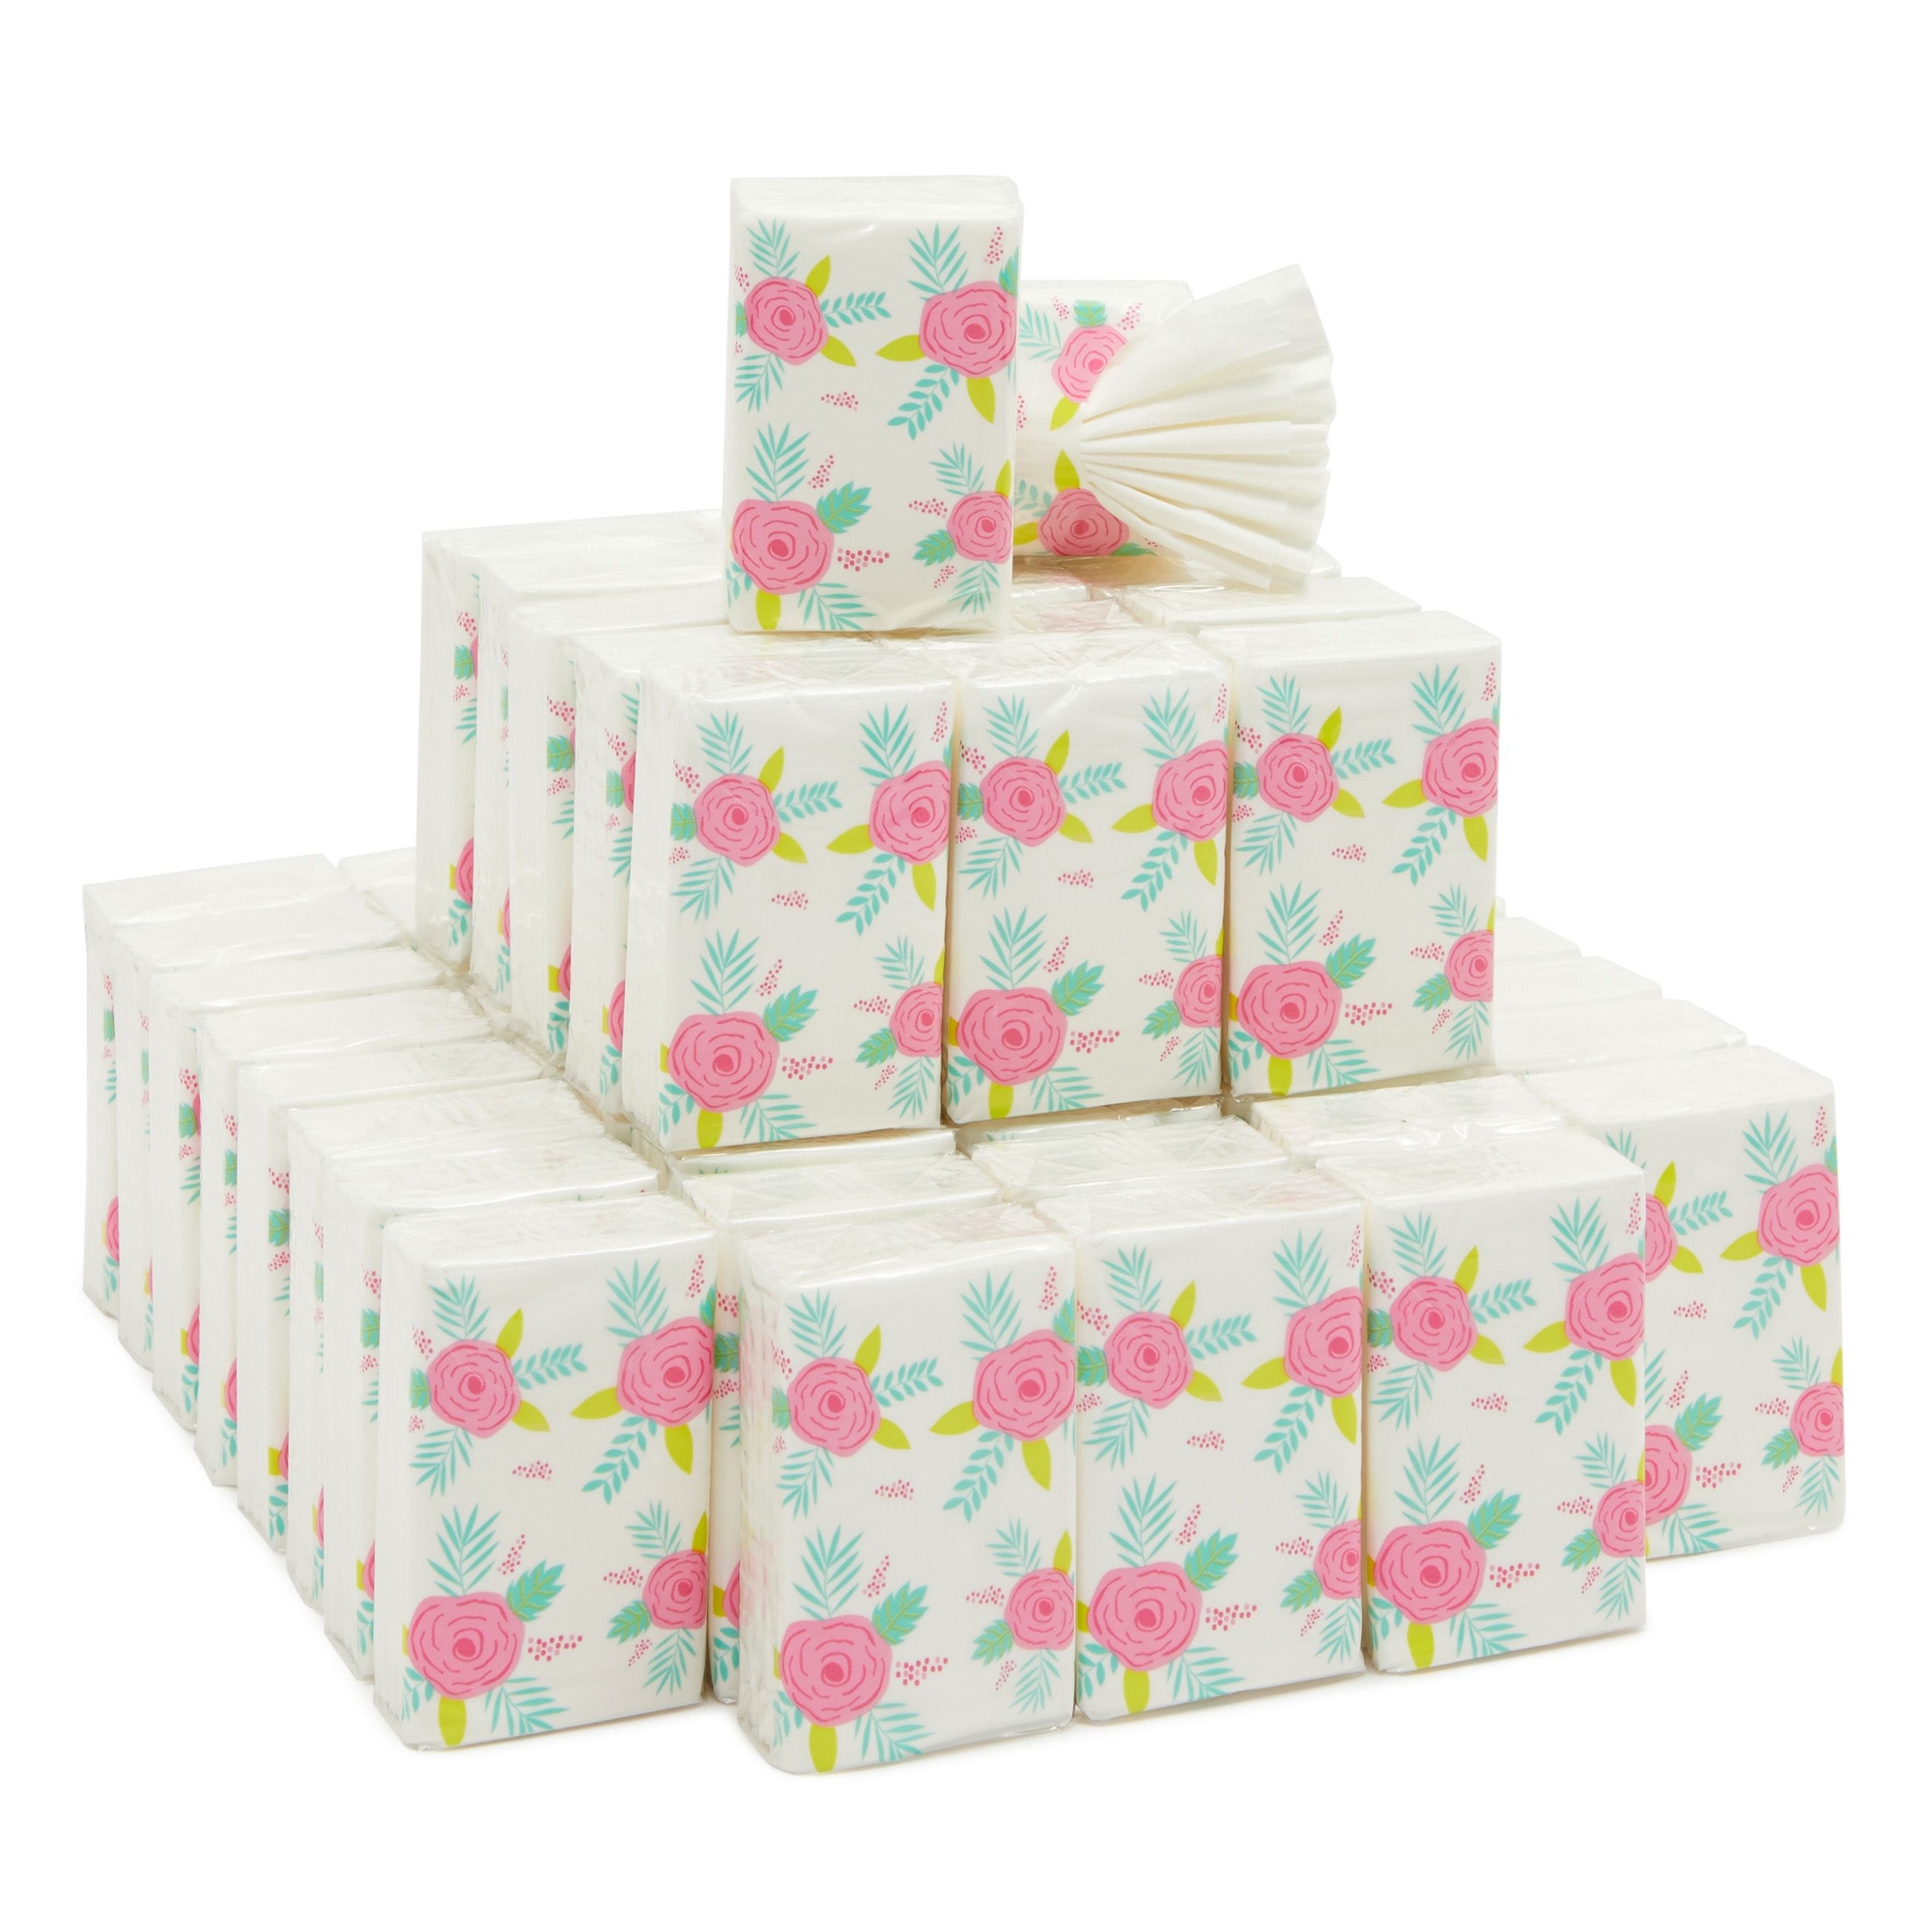 60-Pack Wedding Facial Tissue Souvenirs for Guests - Welcome Bag Party Favors and Bulk Pocket-Size Travel Packs - image 1 of 10